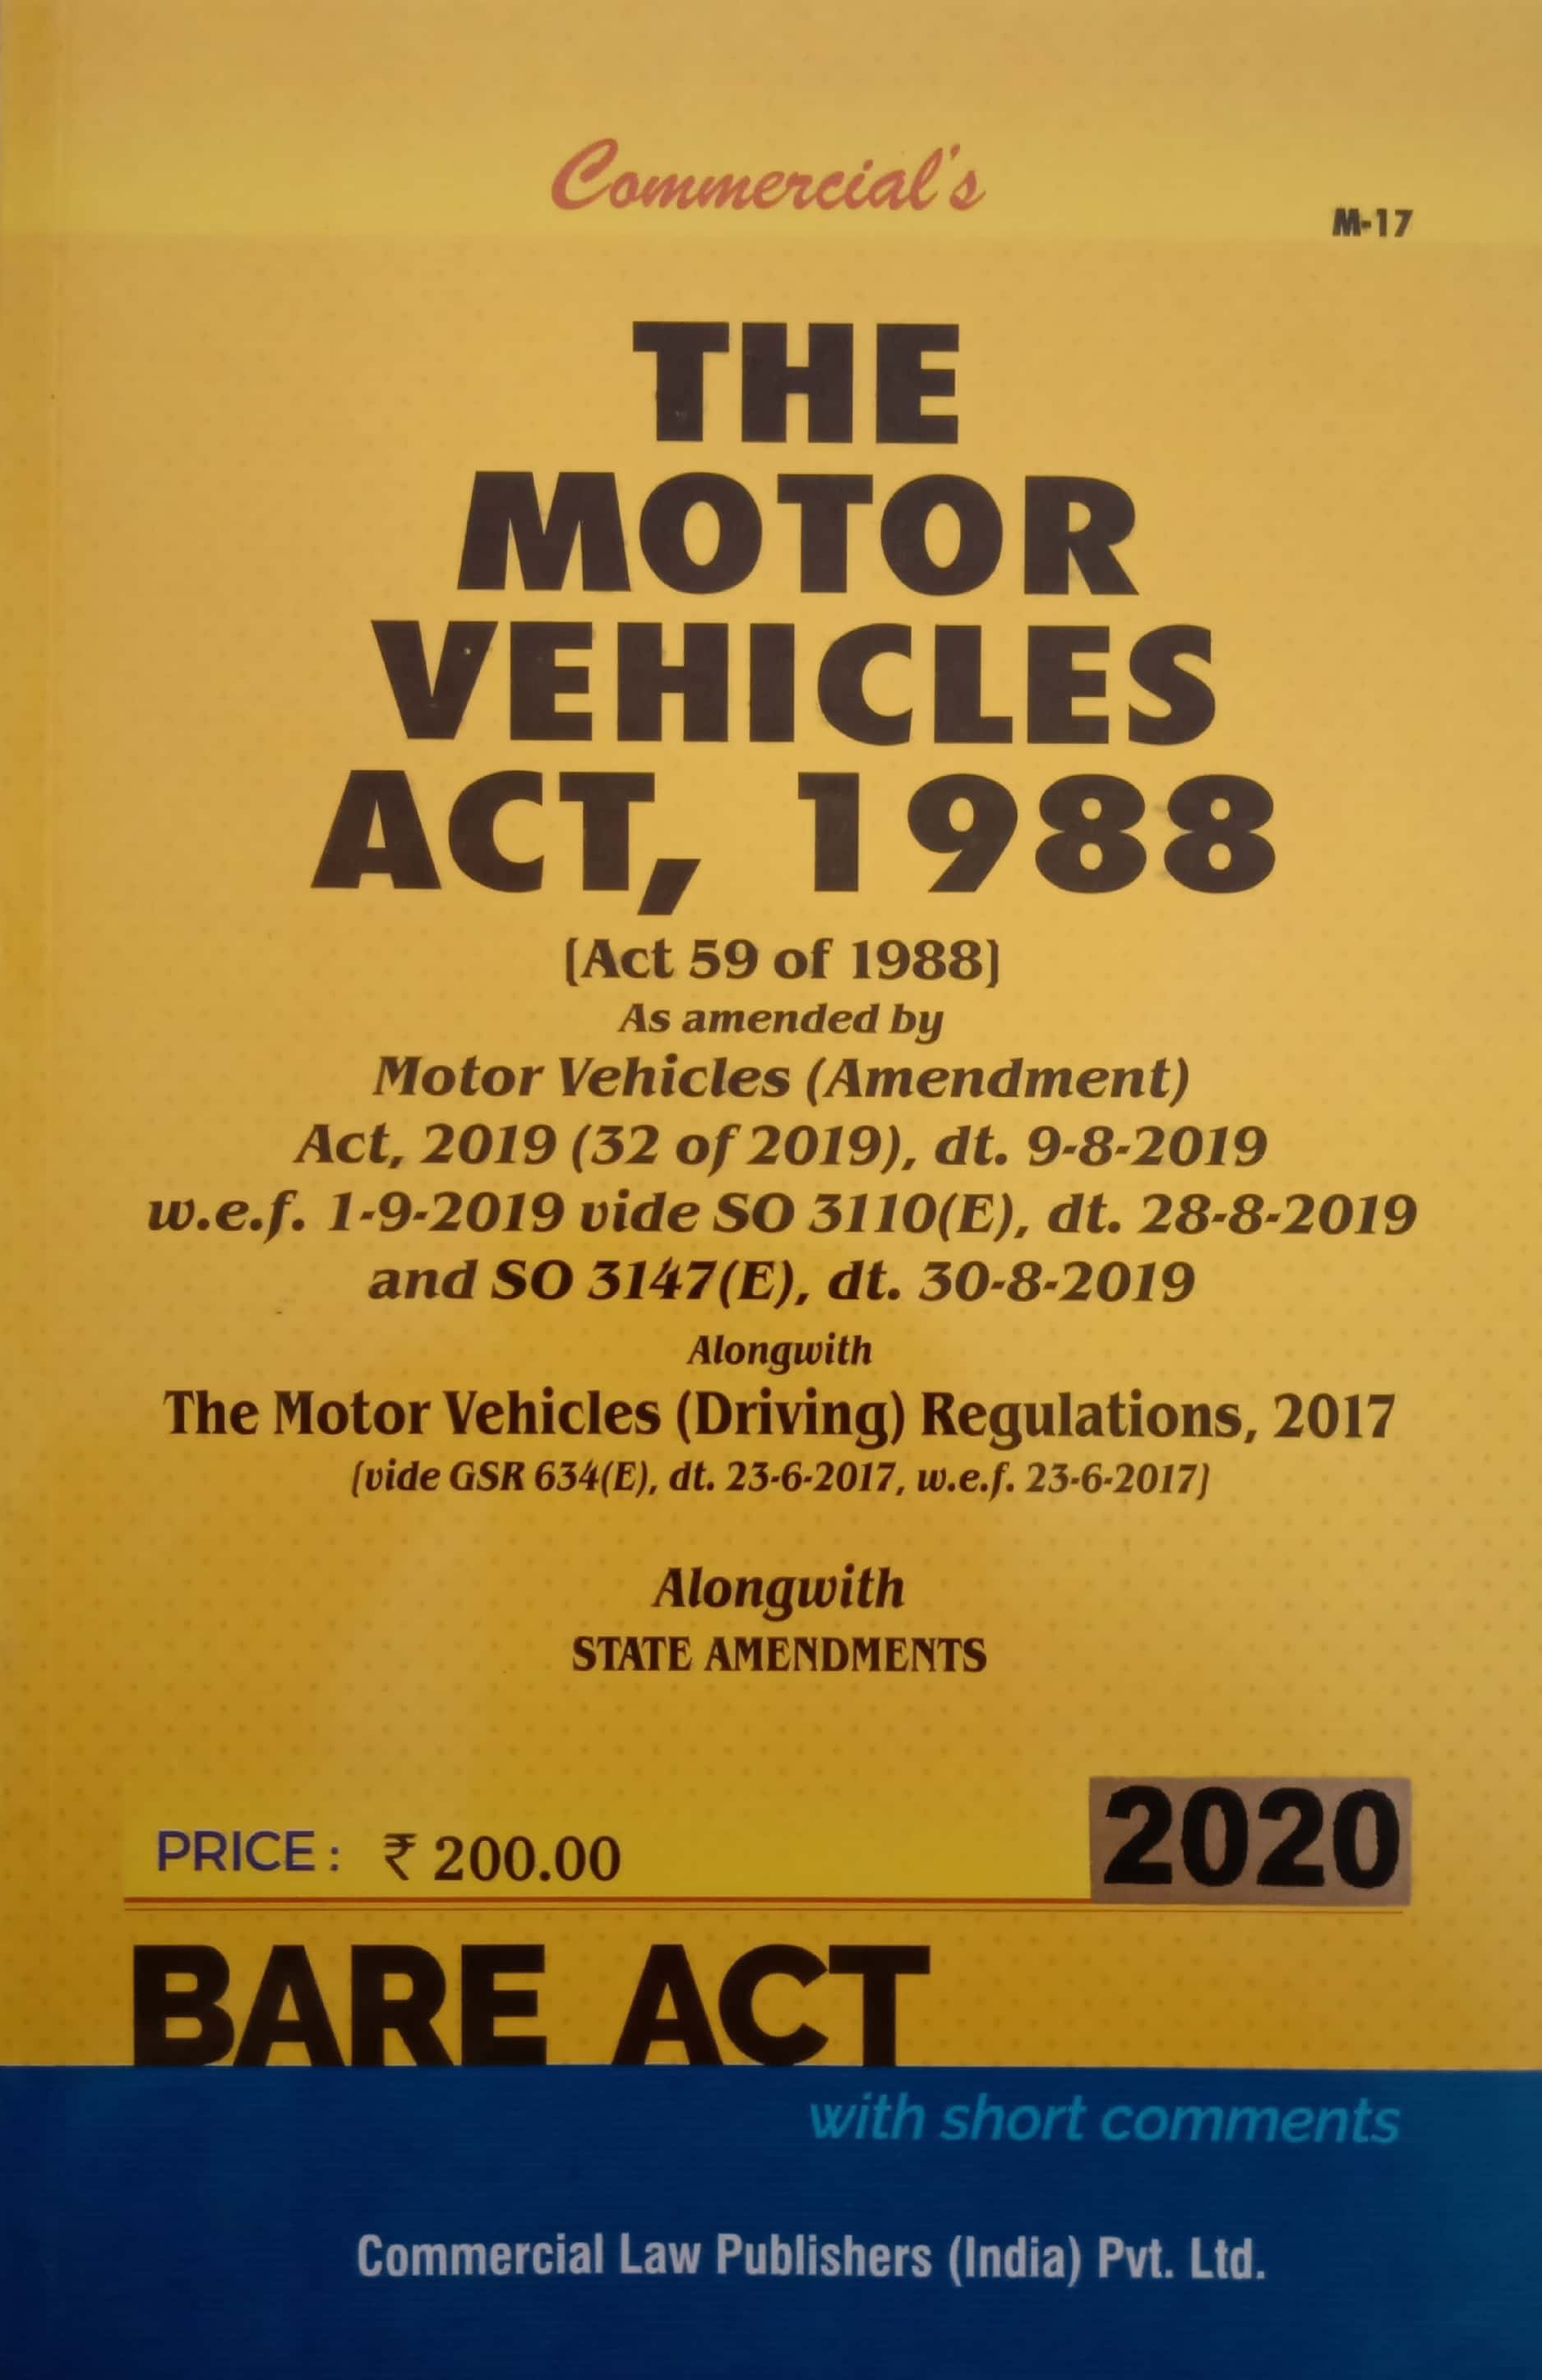 The Motor Vehicles Act, 1988